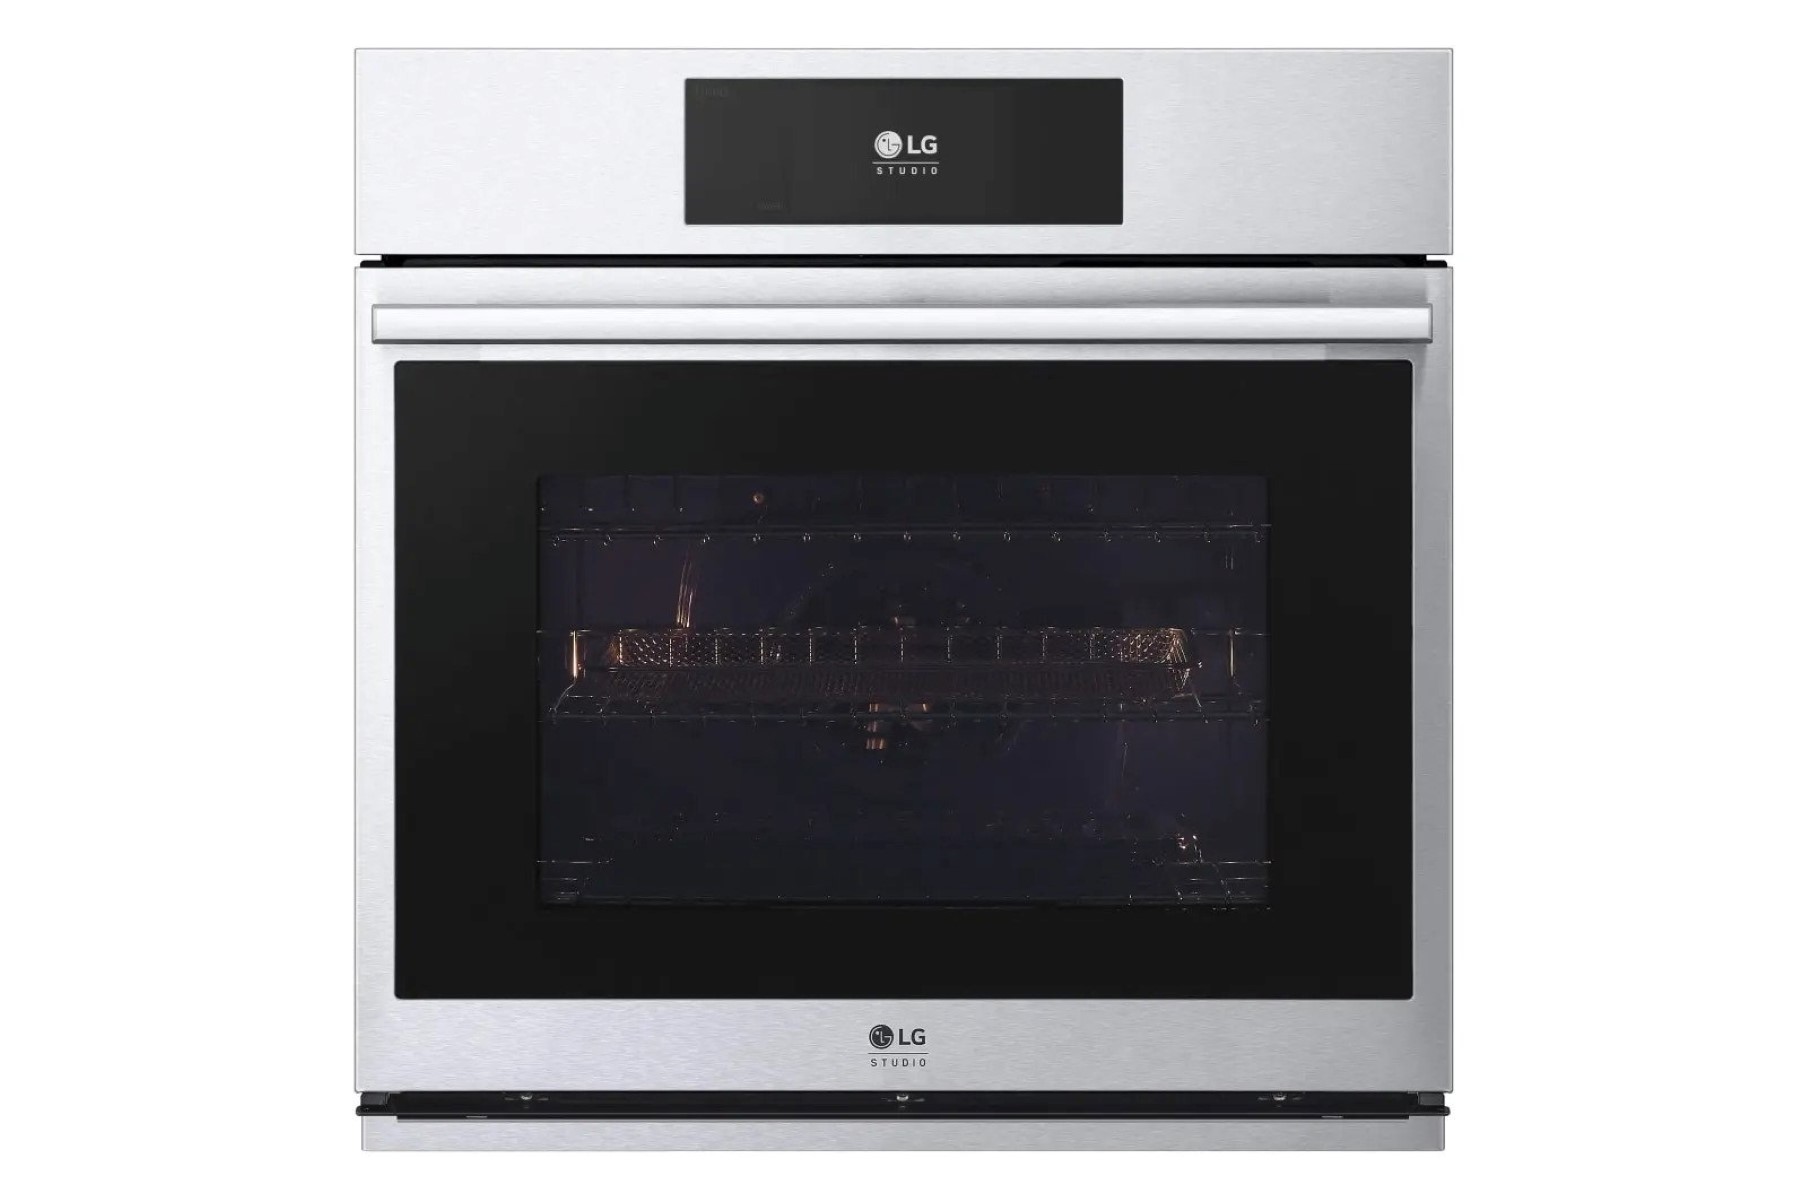 How To Fix The Error Code F-37 For LG Oven